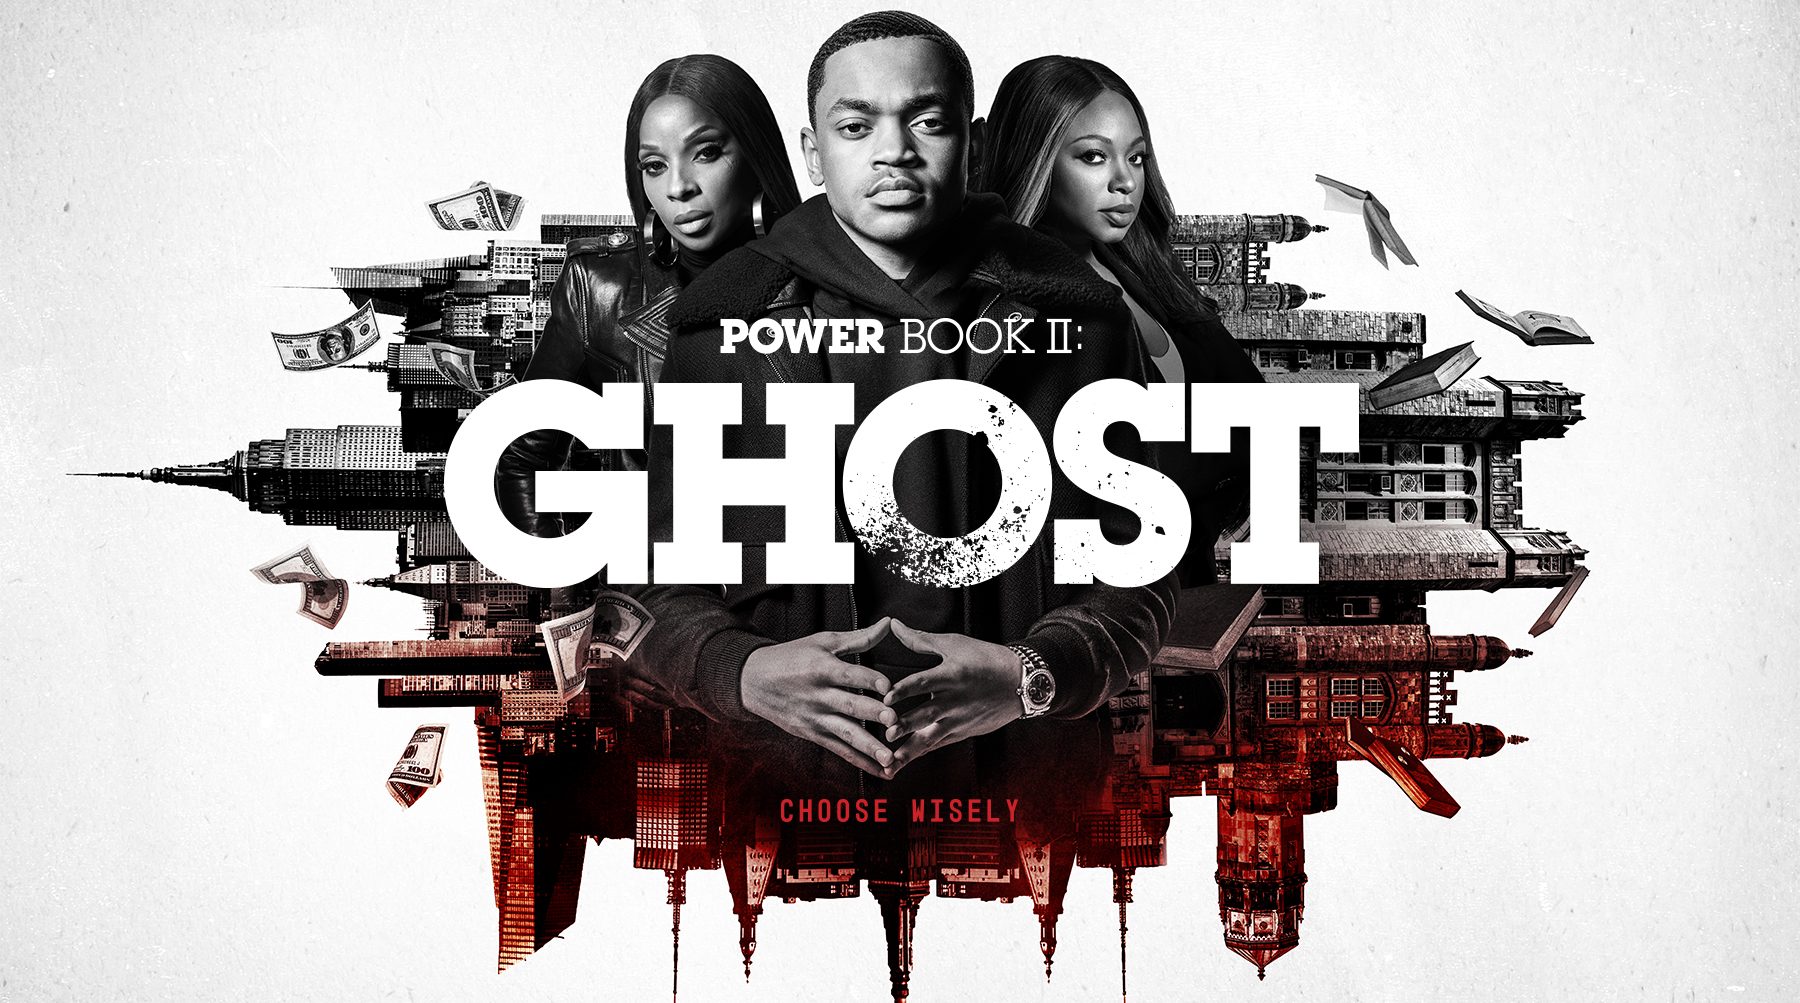 Power Book II: Ghost Season 2: Official Release Date, Teaser, Trailer, Cast and Latest Updates!